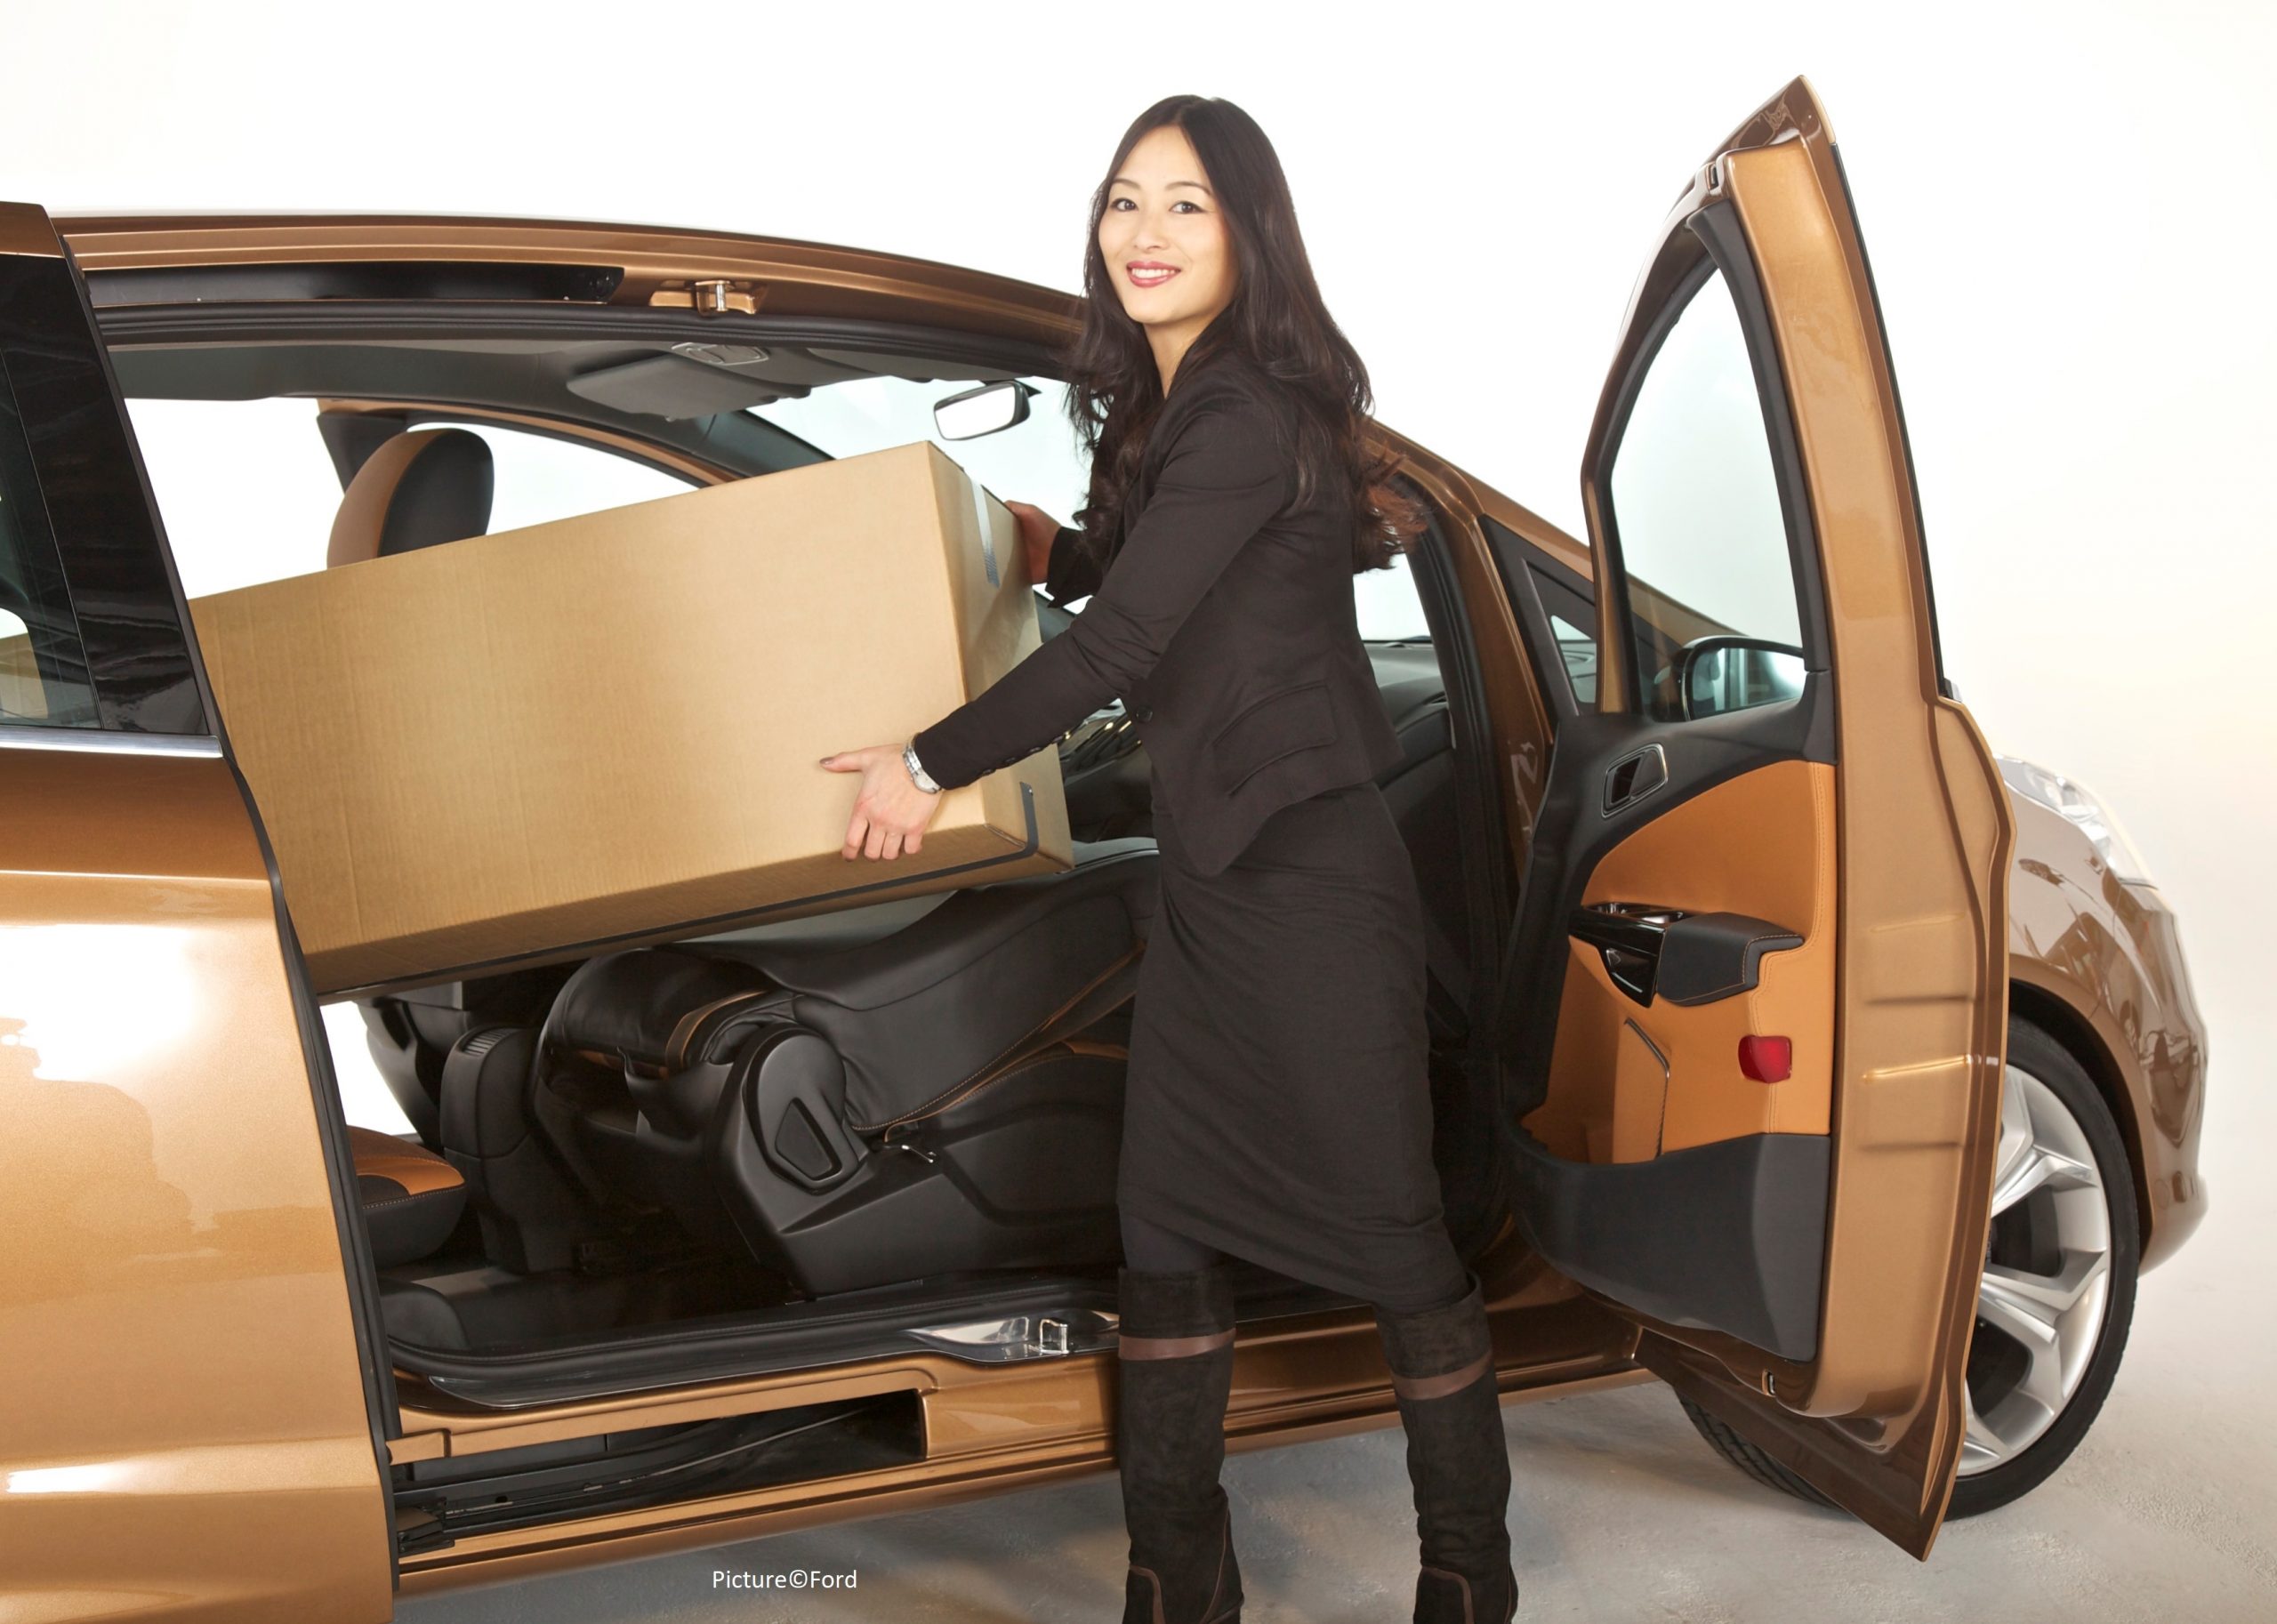 Do I need special car insurance to be a delivery driver?